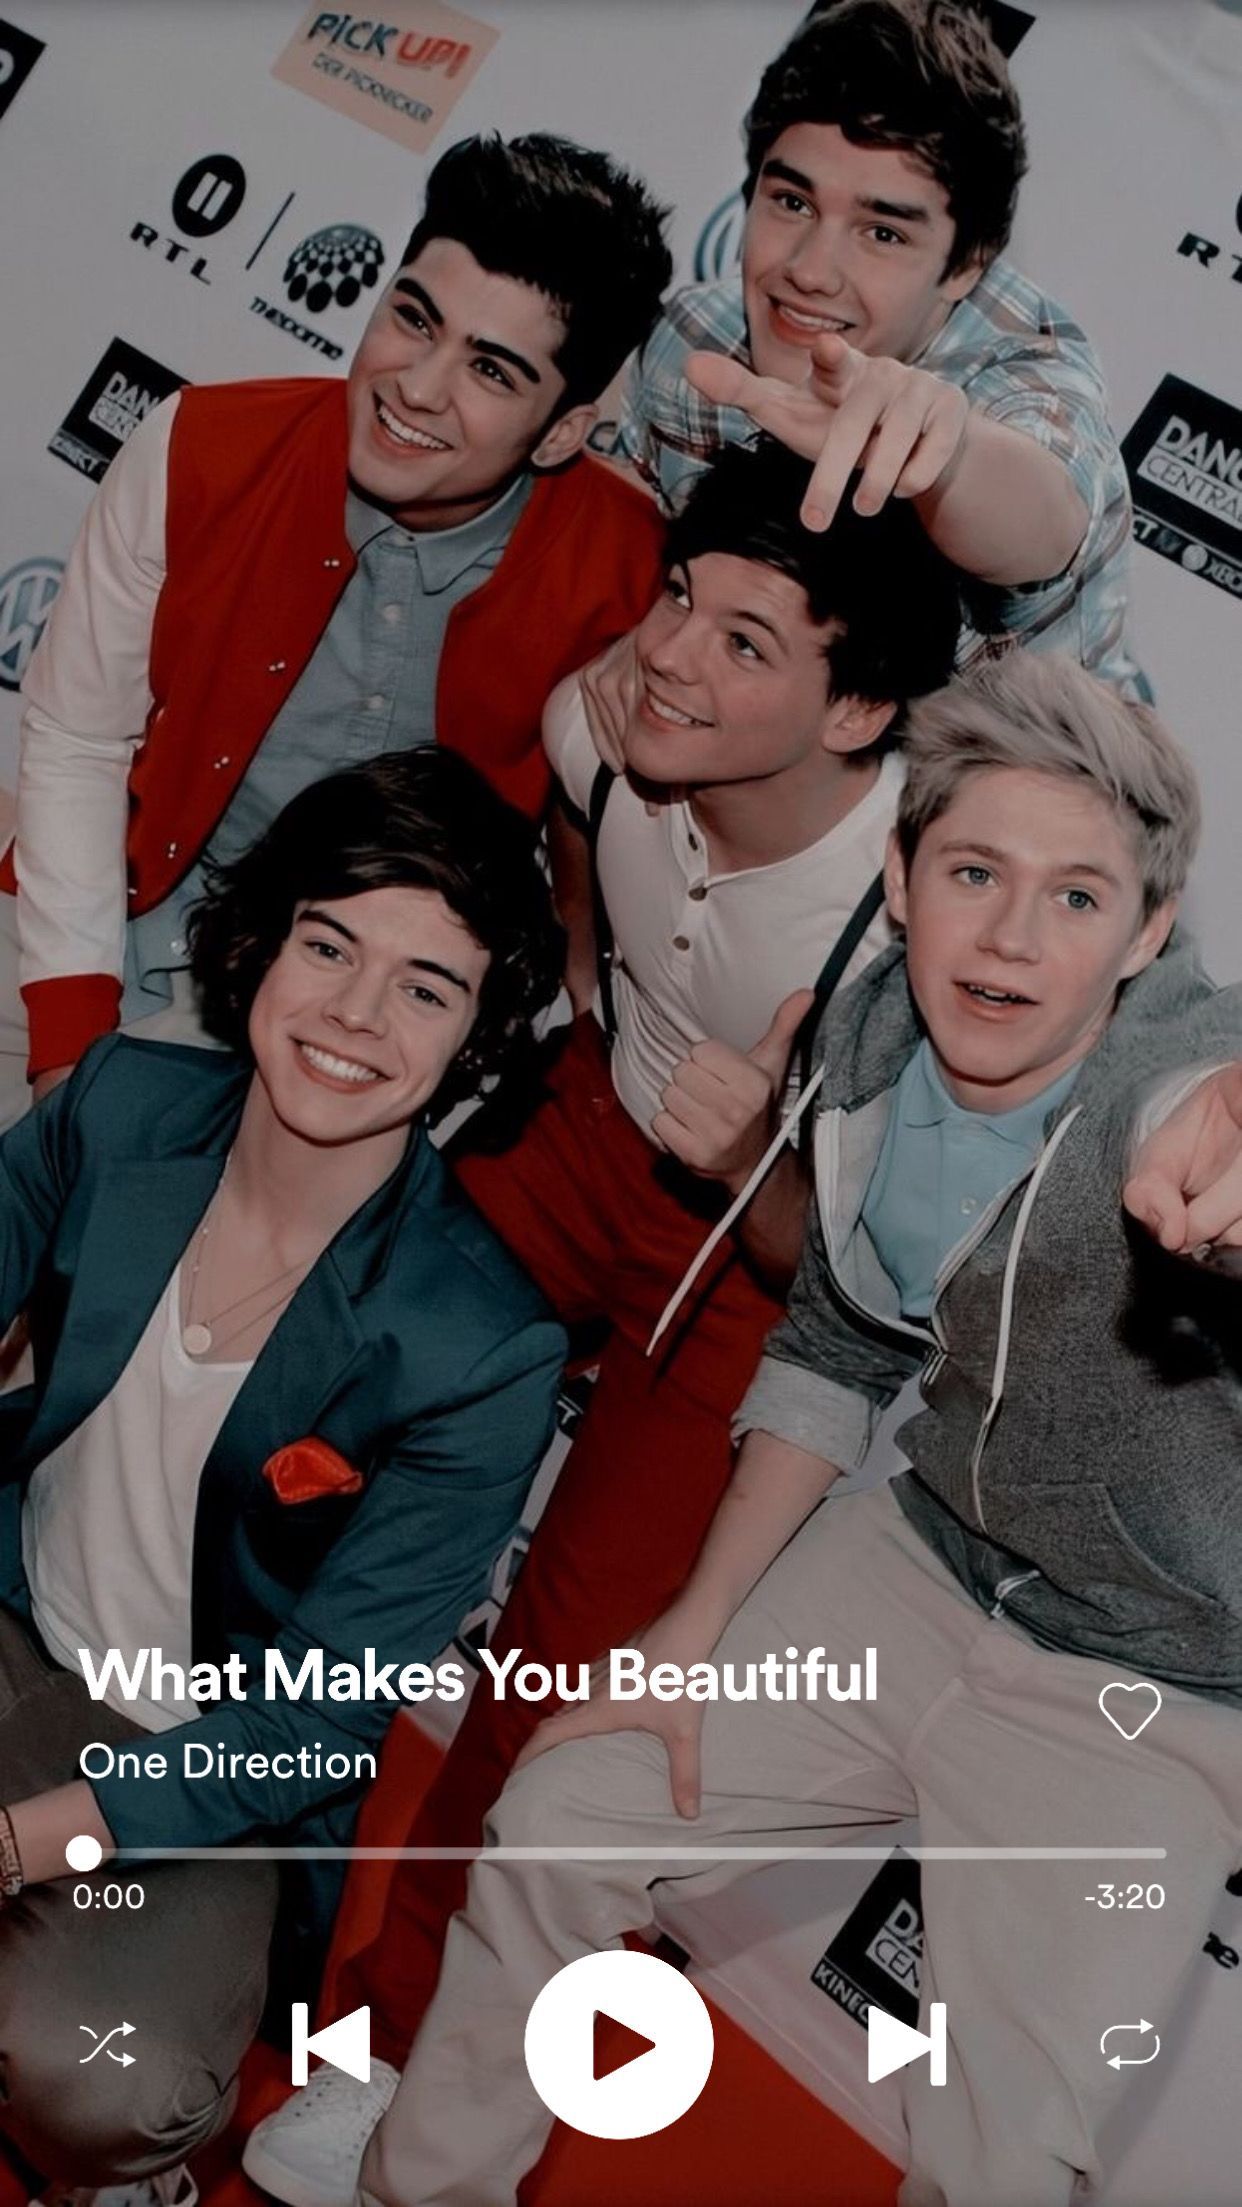 What Makes You Beautiful wallpaper- One Direction. One direction picture, One direction lockscreen, One direction wallpaper